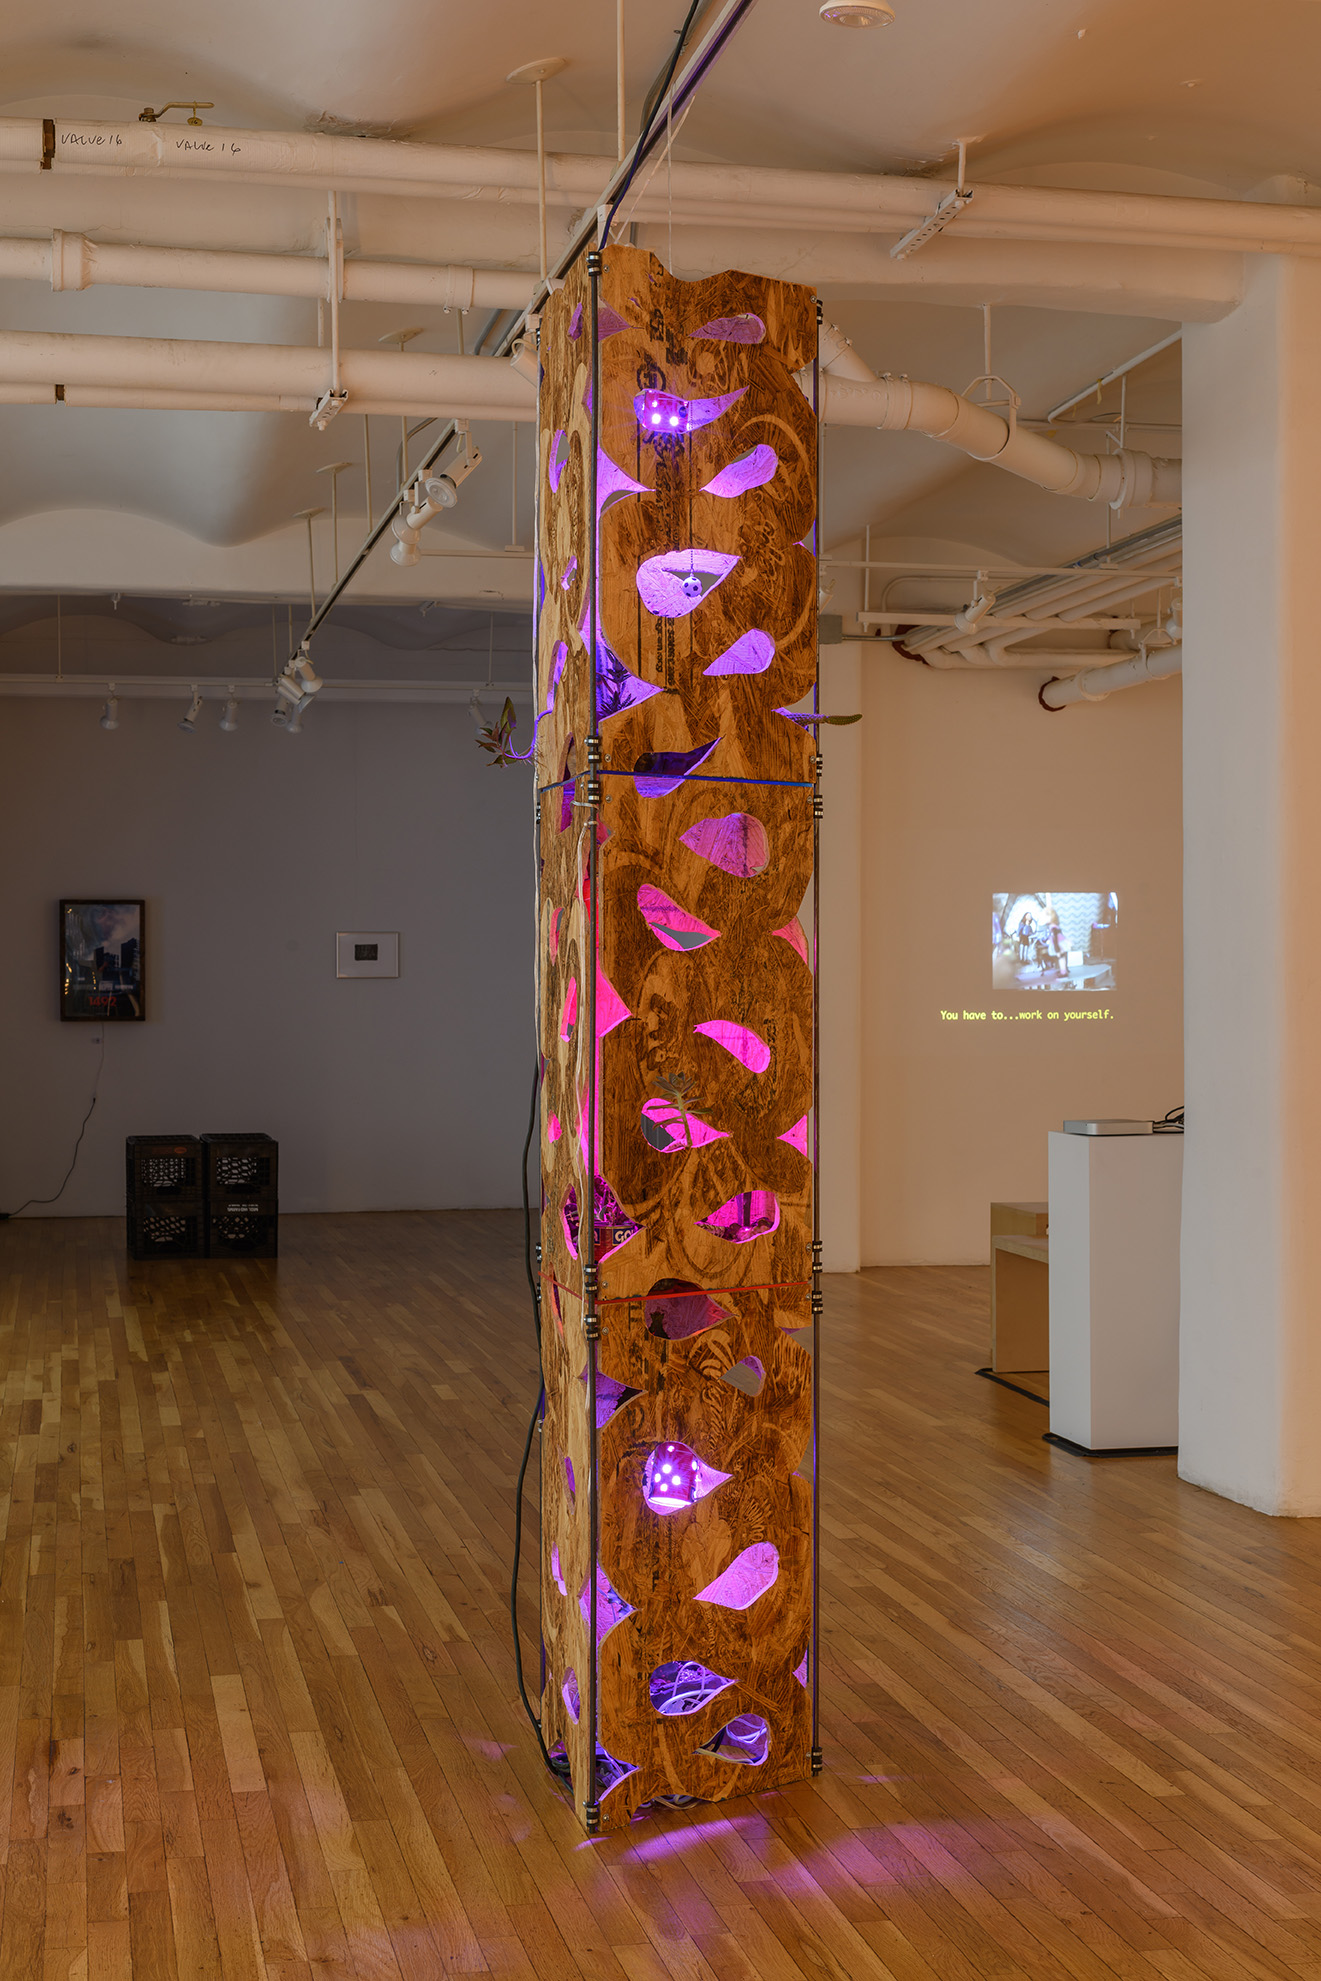 [A tall, totem-like sculpture is illuminated with pink and purple lights from within. The work is made of CNC’d and laser etched plywood planks. Cuts in the wood allow areas of light to leak out of the sculpture.]